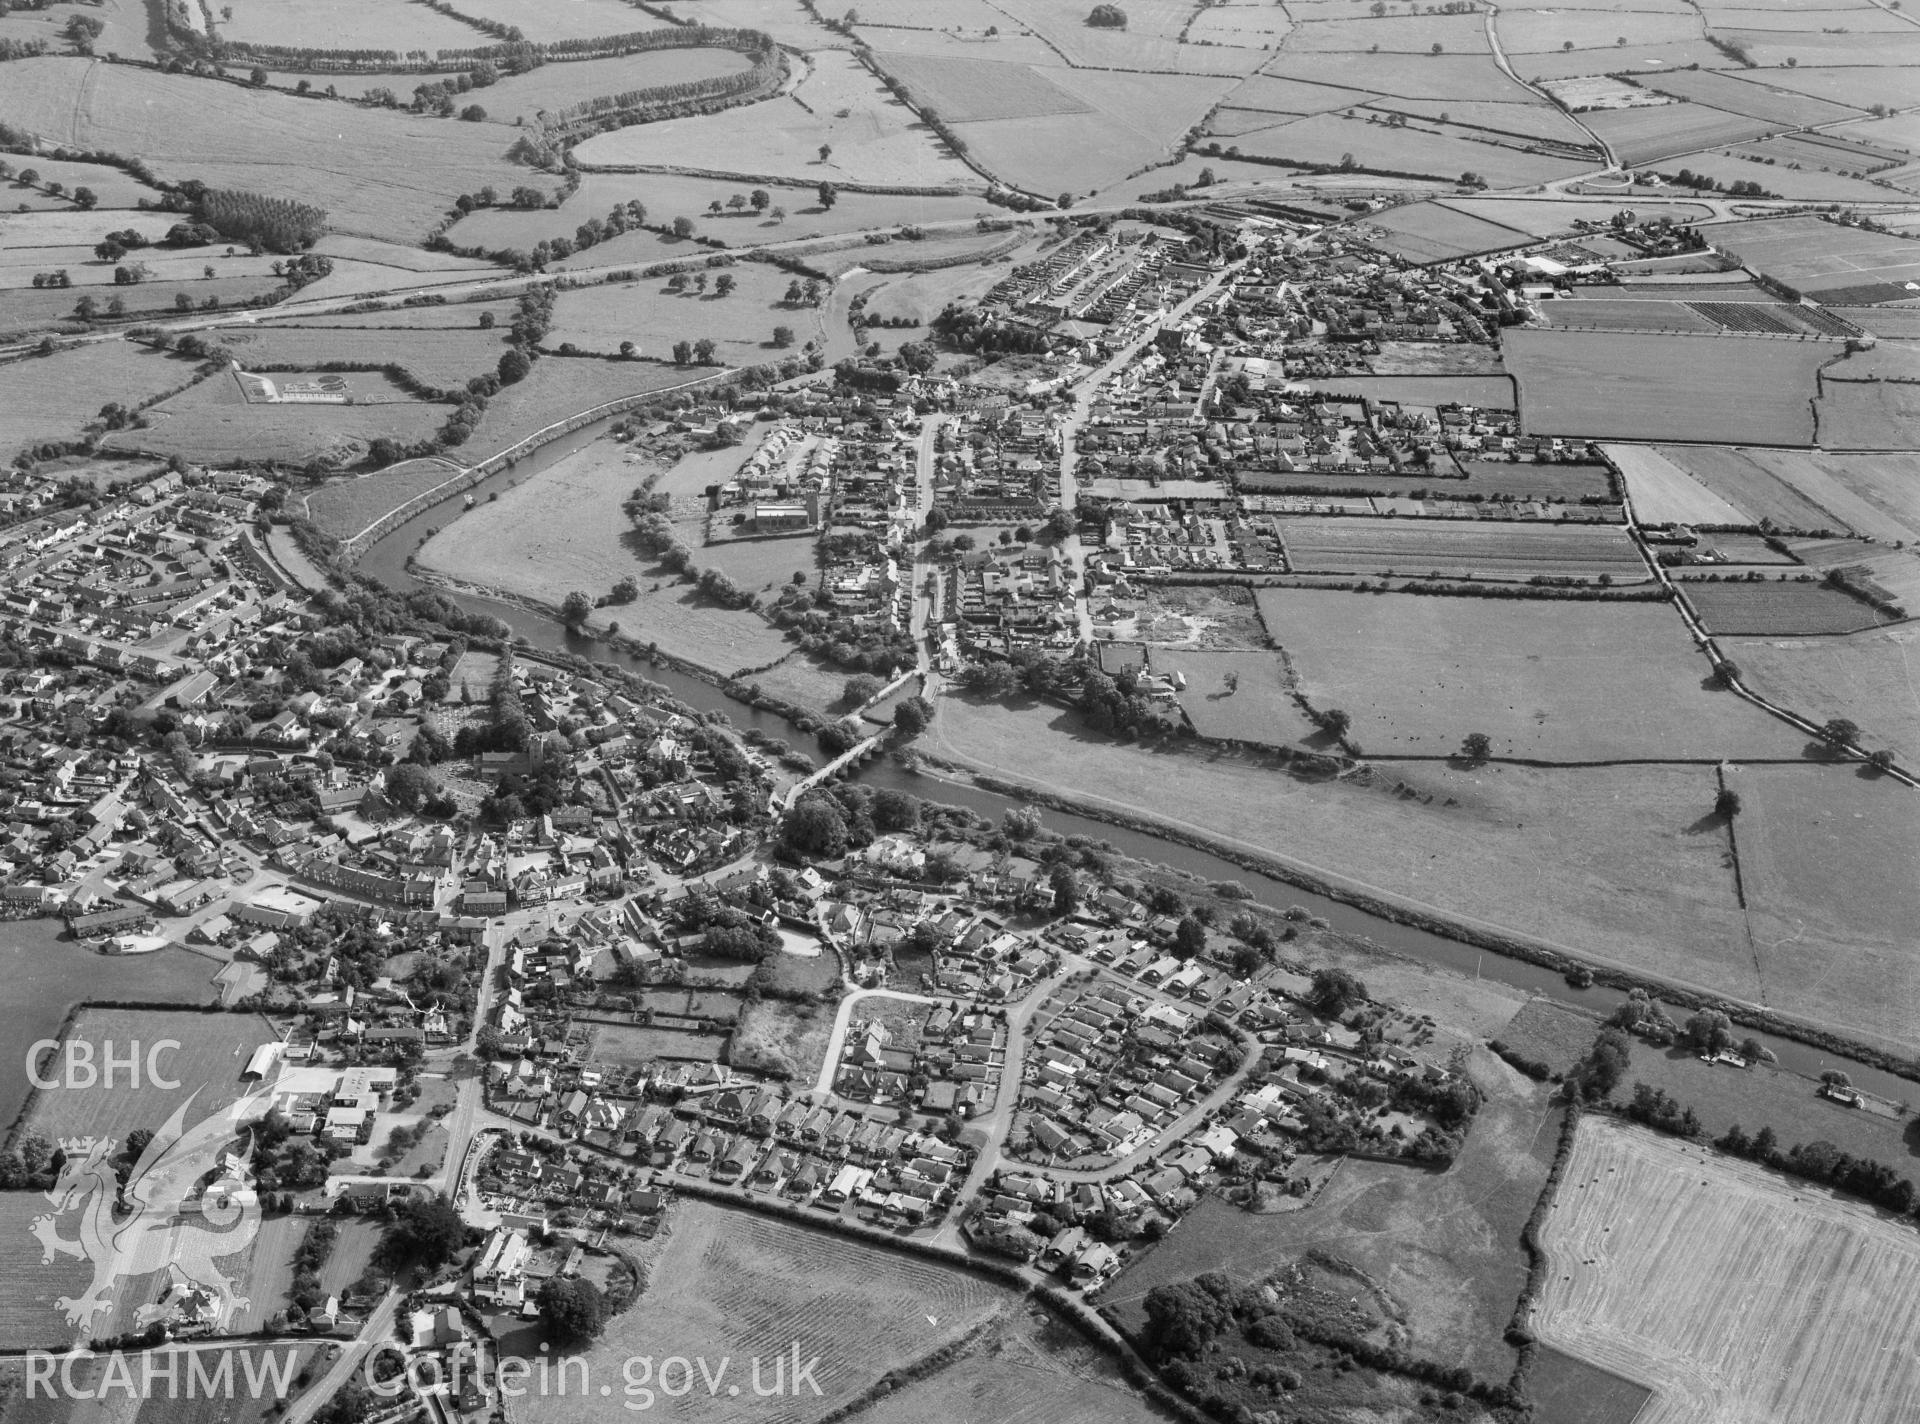 RCAHMW Black and white oblique aerial photograph of Holt Borough, Holt, taken by C.R. Musson, 13/08/94